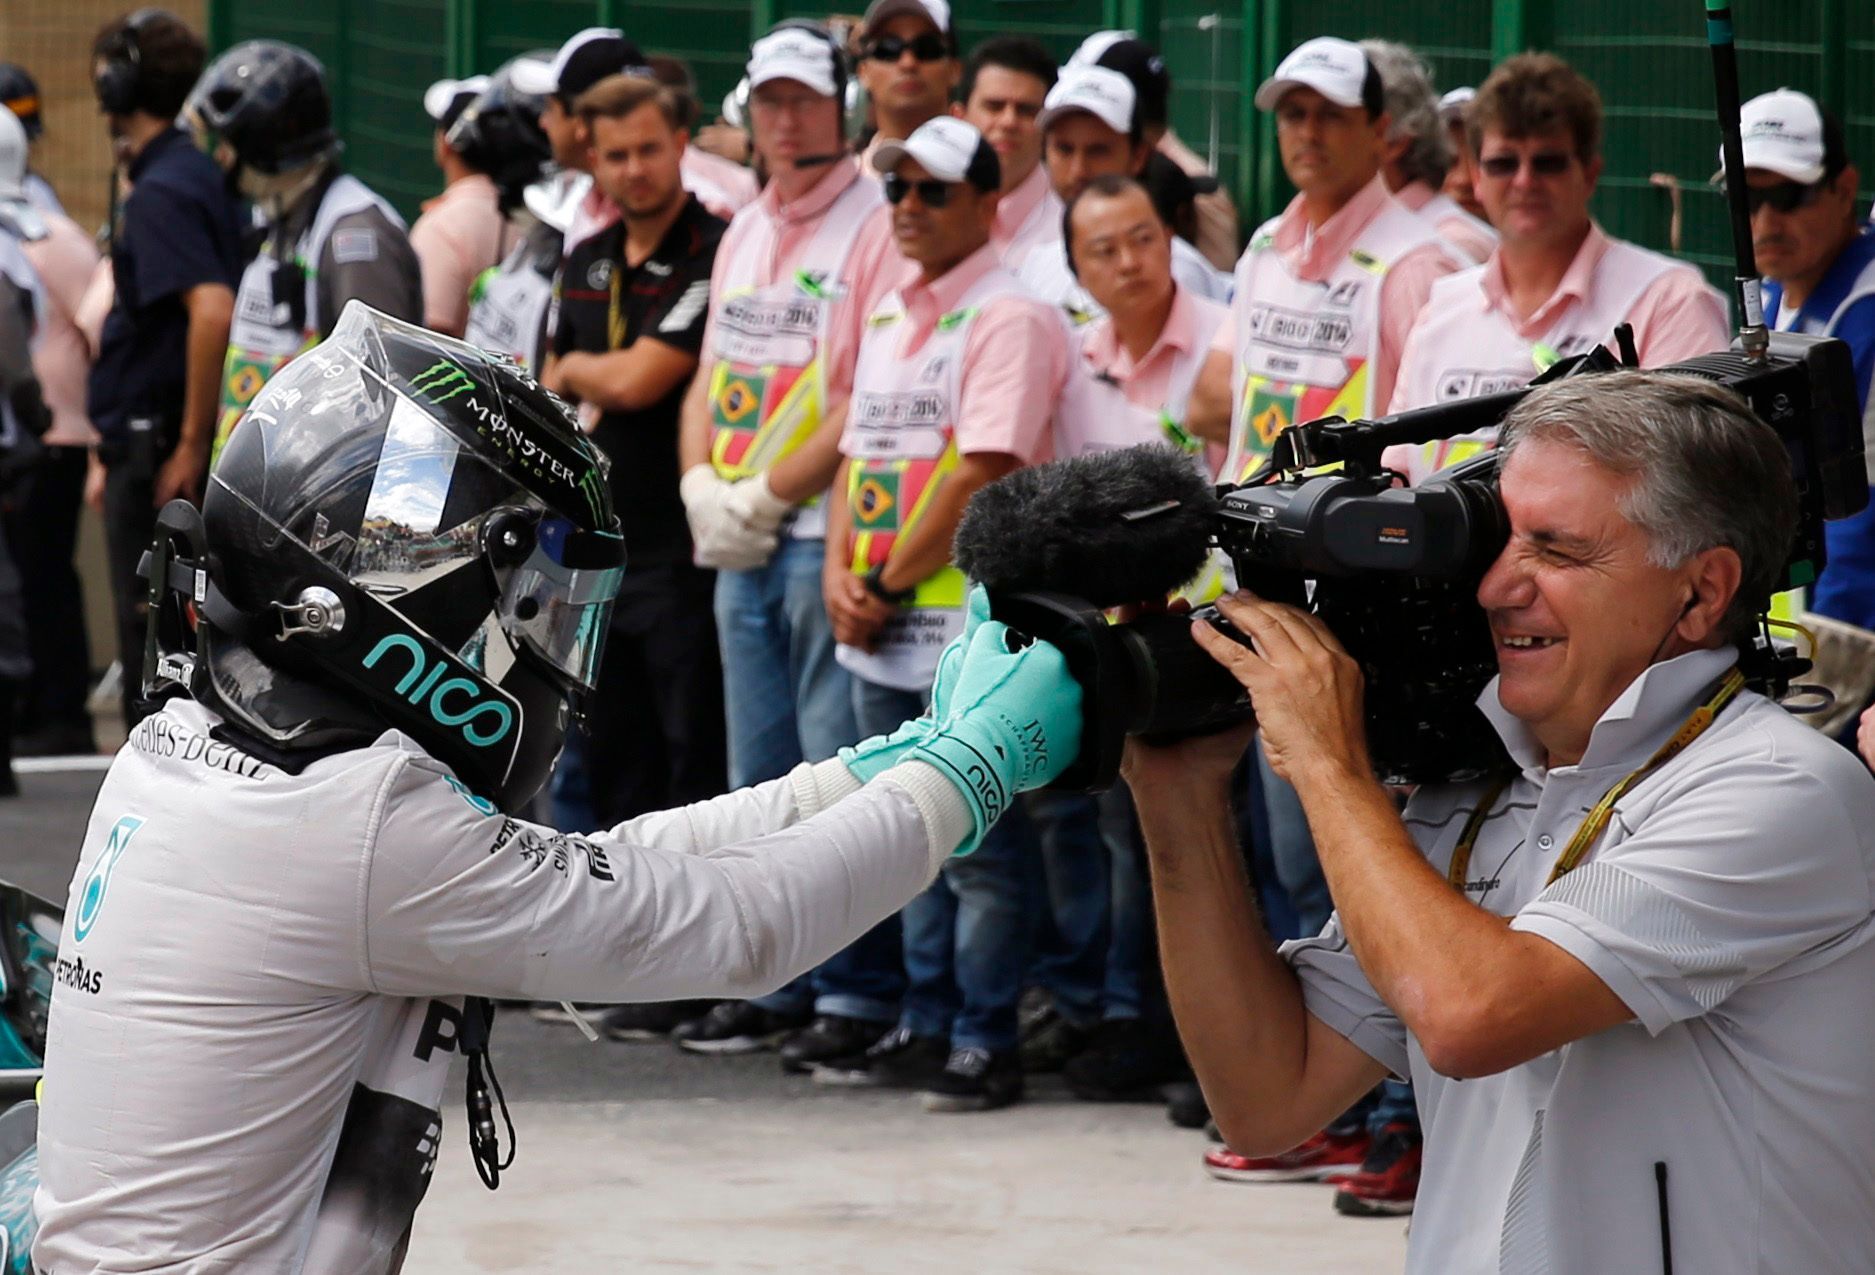 Mercedes Formula One driver Nico Rosberg of Germany jokes with the cameraman to celebrate as he steps out of his car after winning the Brazilian Grand Prix in Sao Paulo